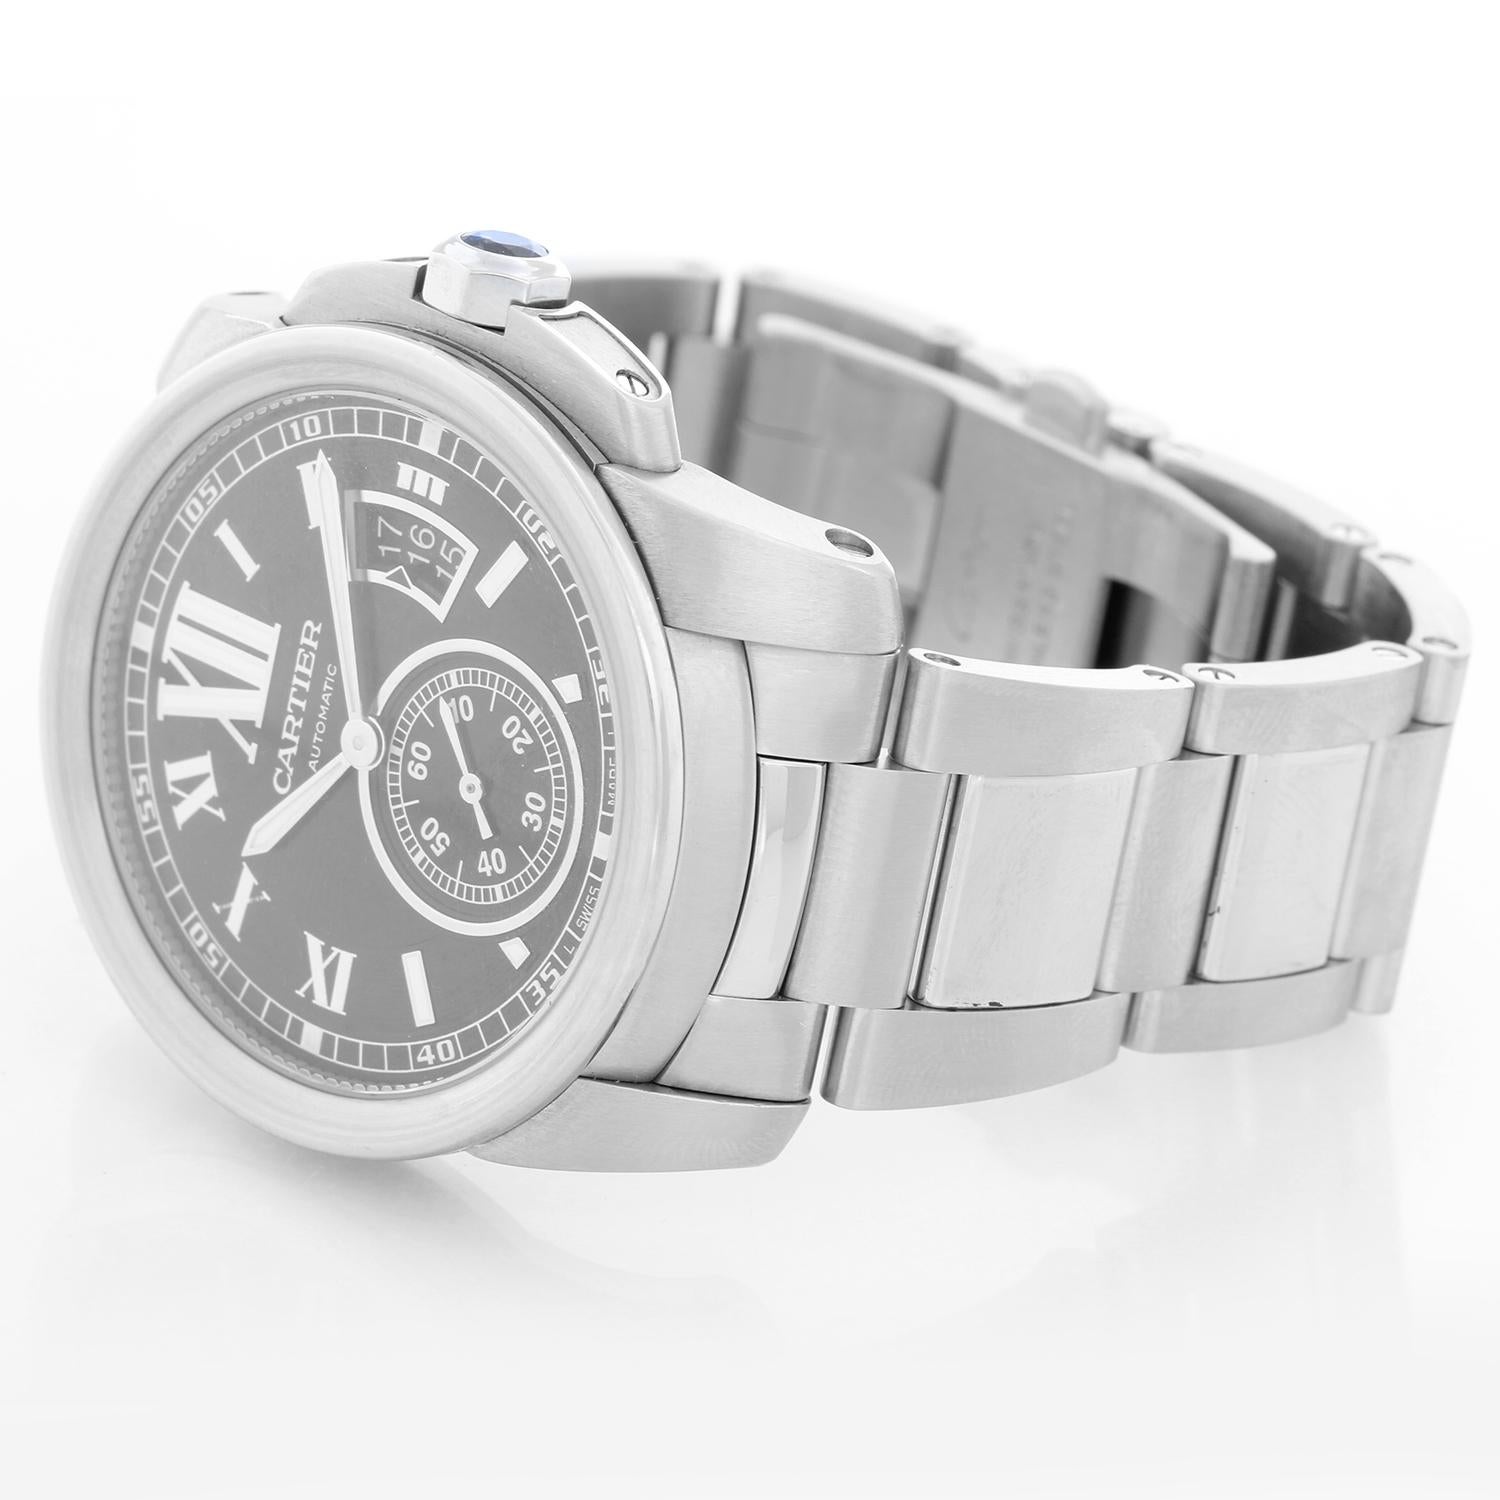 Cartier Calibre de Cartier Men's Stainless Steel Watch W7100037 3389 - Automatic winding. Stainless steel case (42mm diameter). Black dial with white Roman numerals and stick markers; date at 3 o'clock, subseconds at 6 o'clock. Stainless Steel